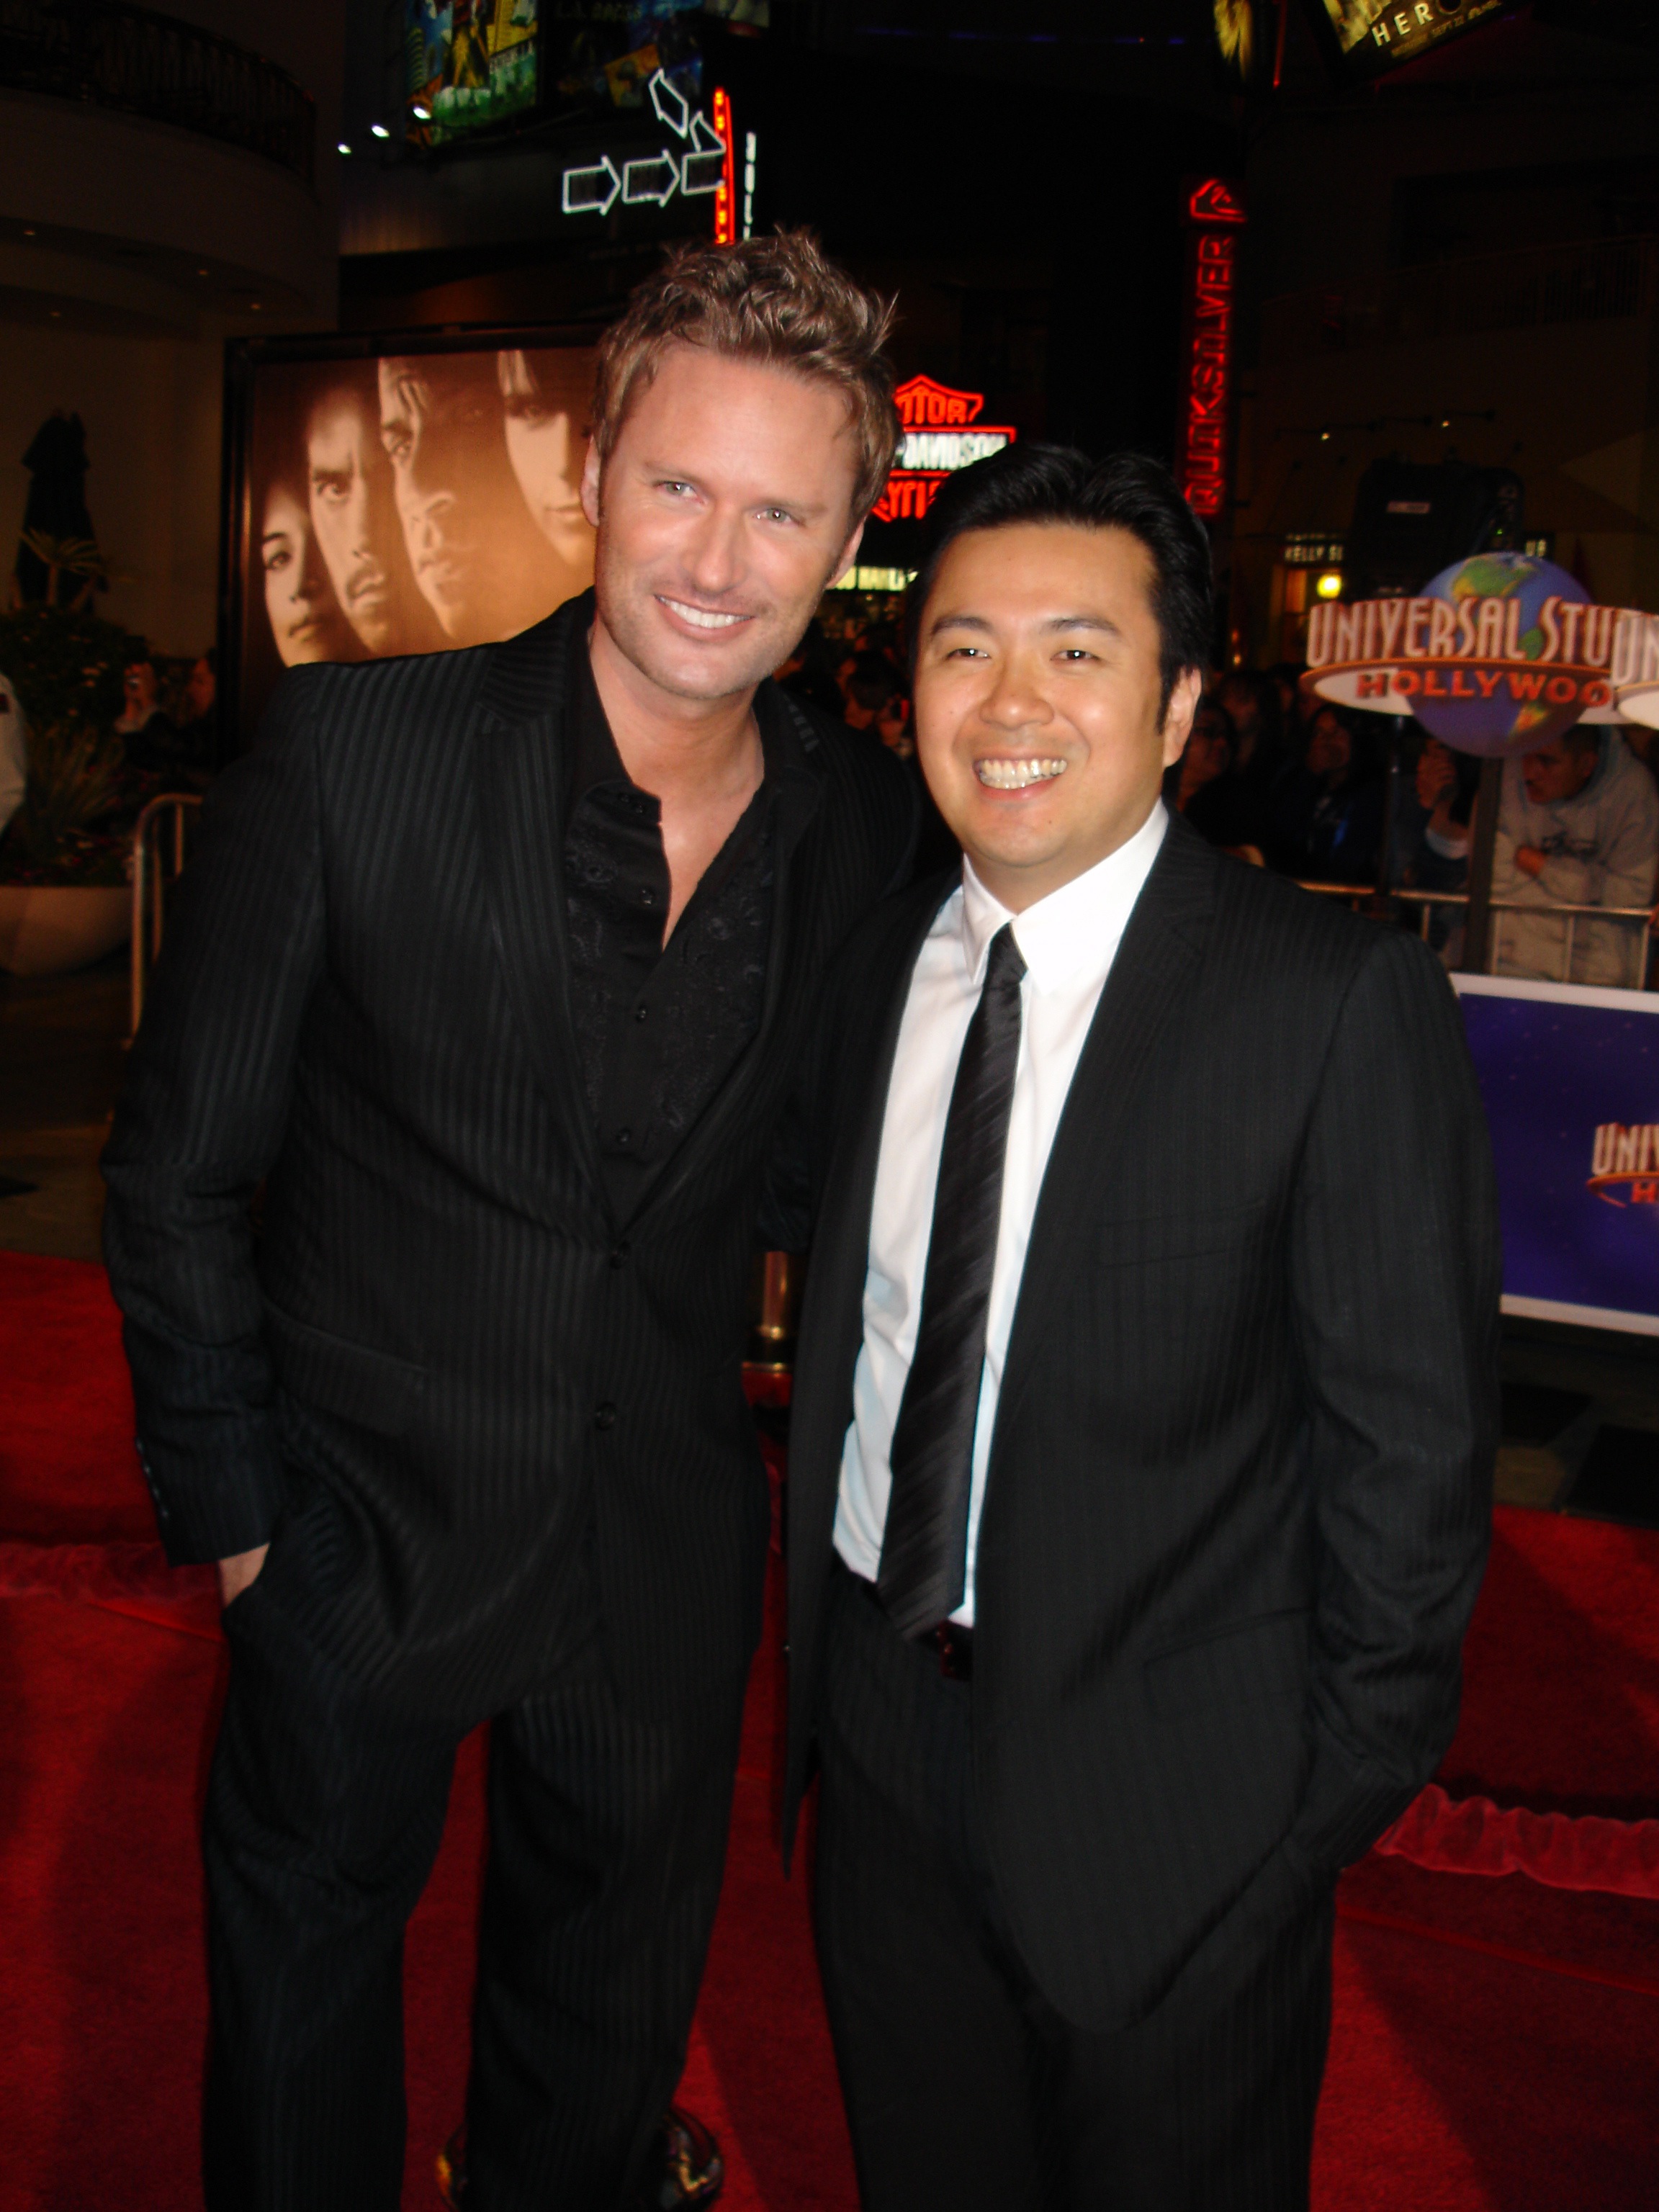 Composer Brian Tyler and director Justin Lin at the premiere of Fast and Furious